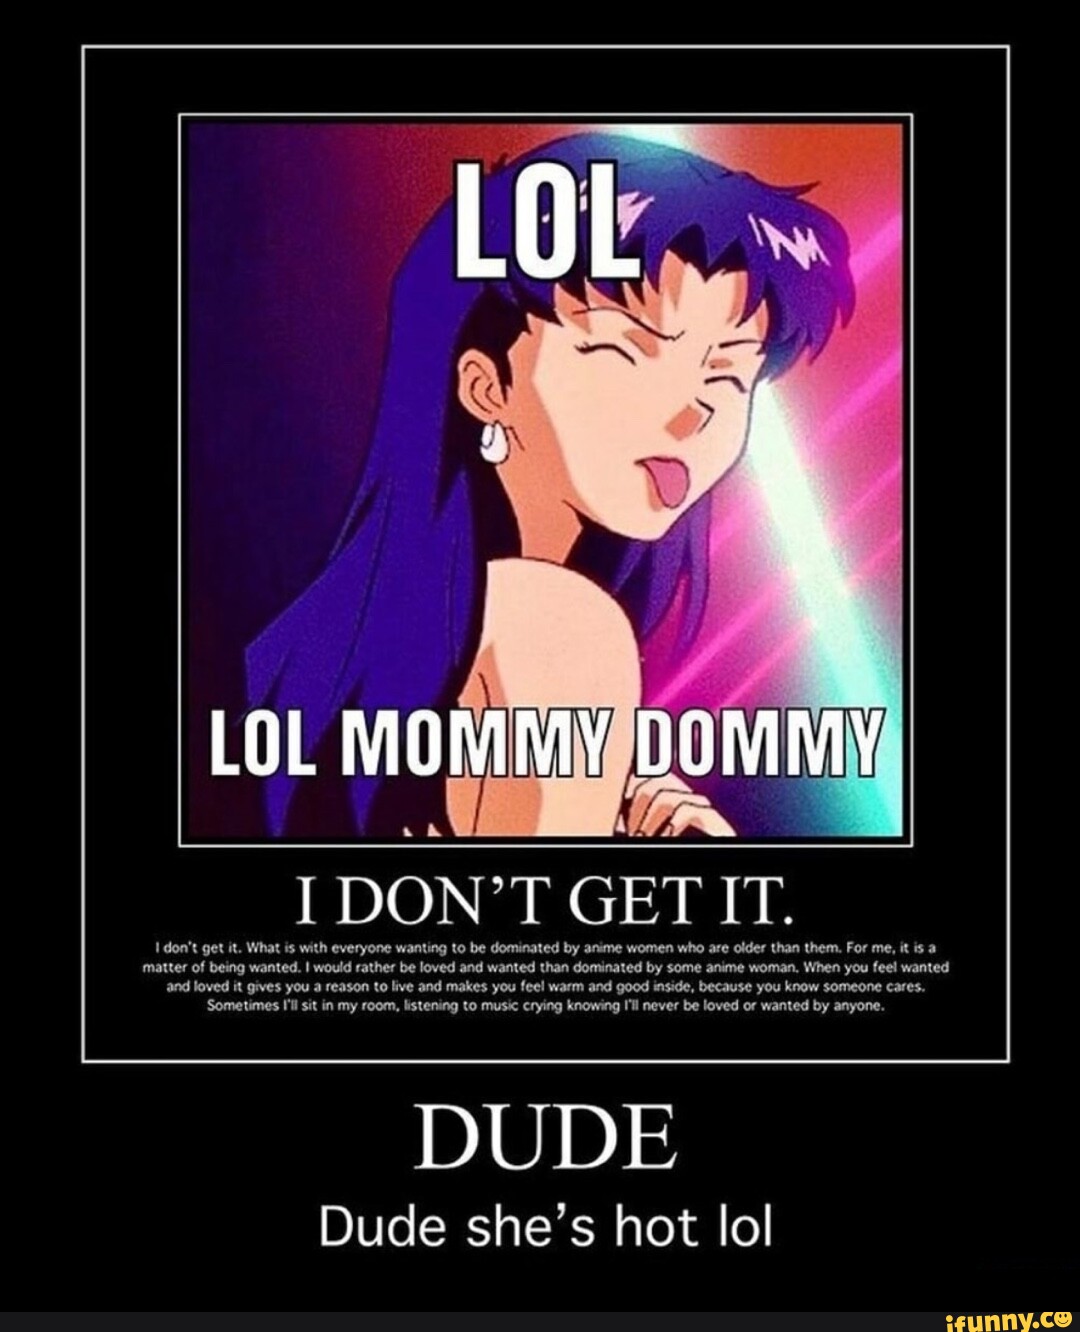 Anime dommy mommy